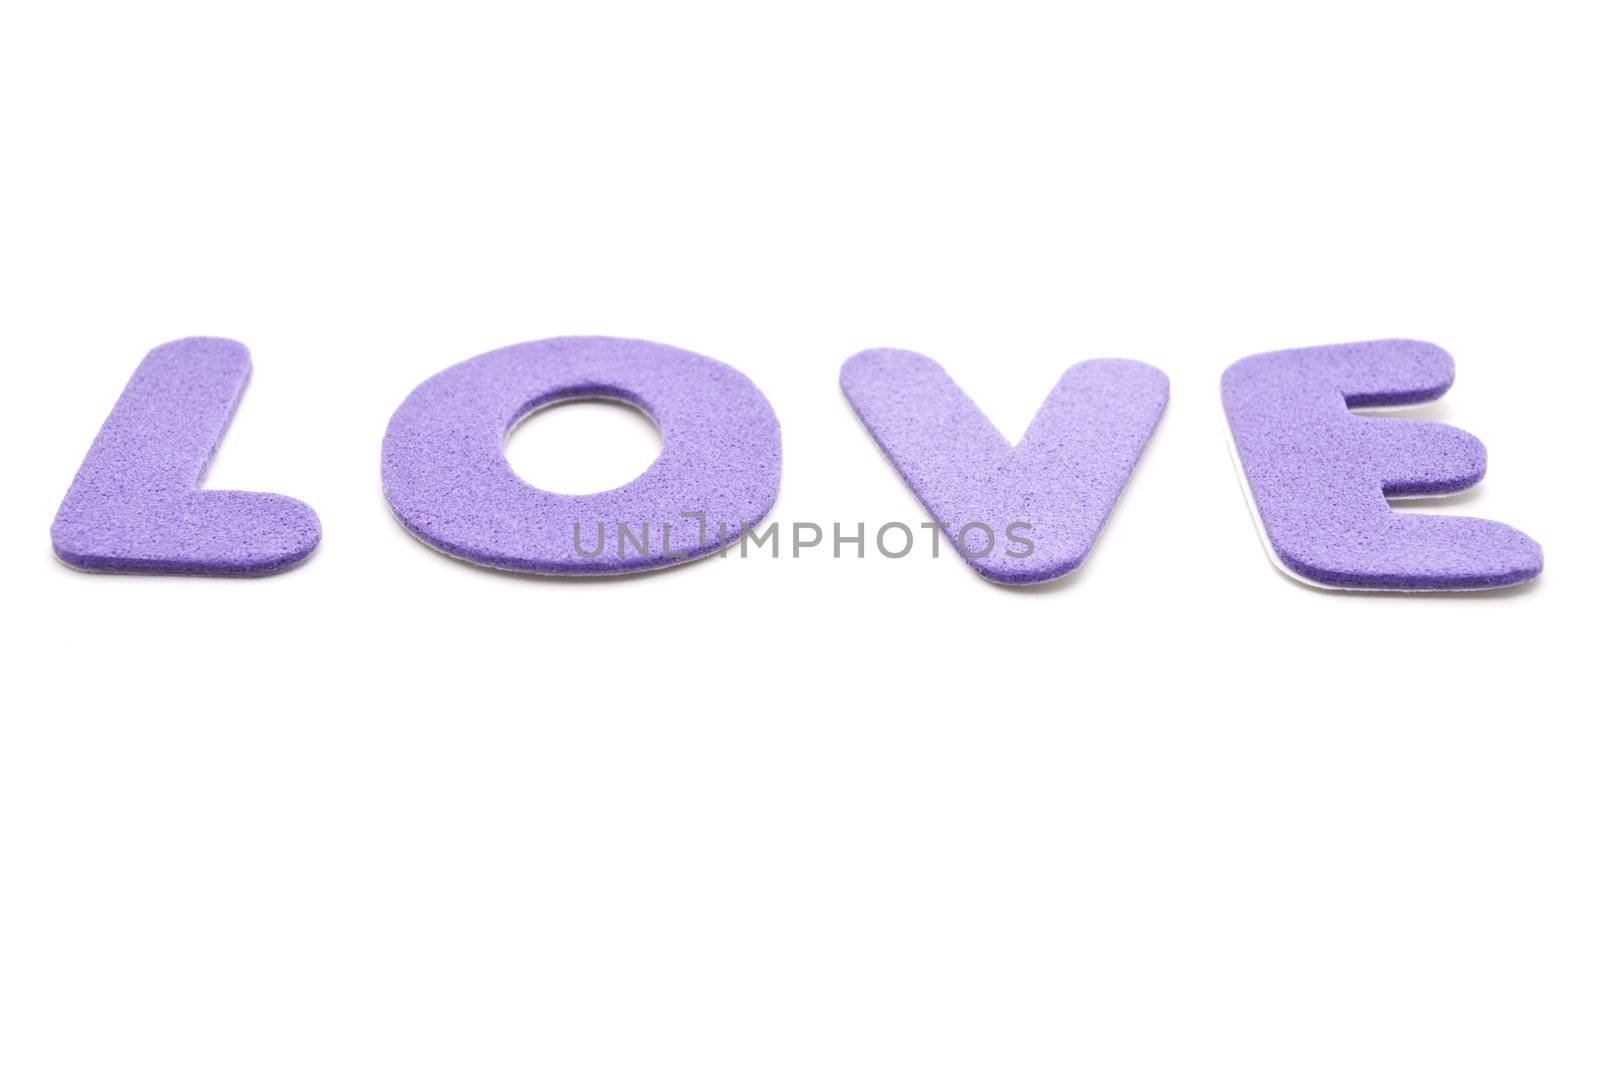 The word 'Love' spelled out in mauve lettering  on a white background.